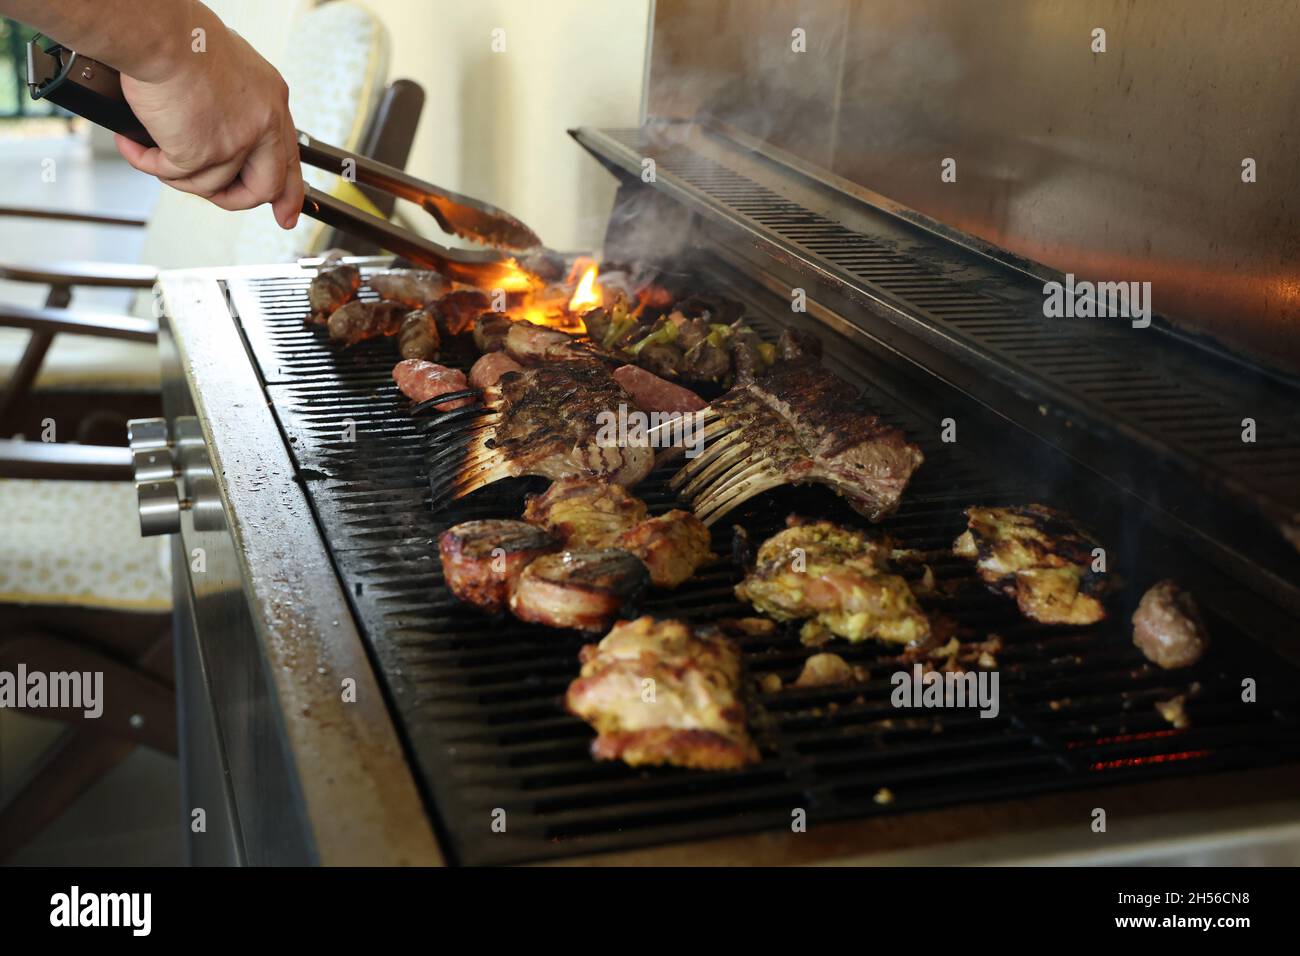 Fried meat on a gas grill, close-up Stock Photo